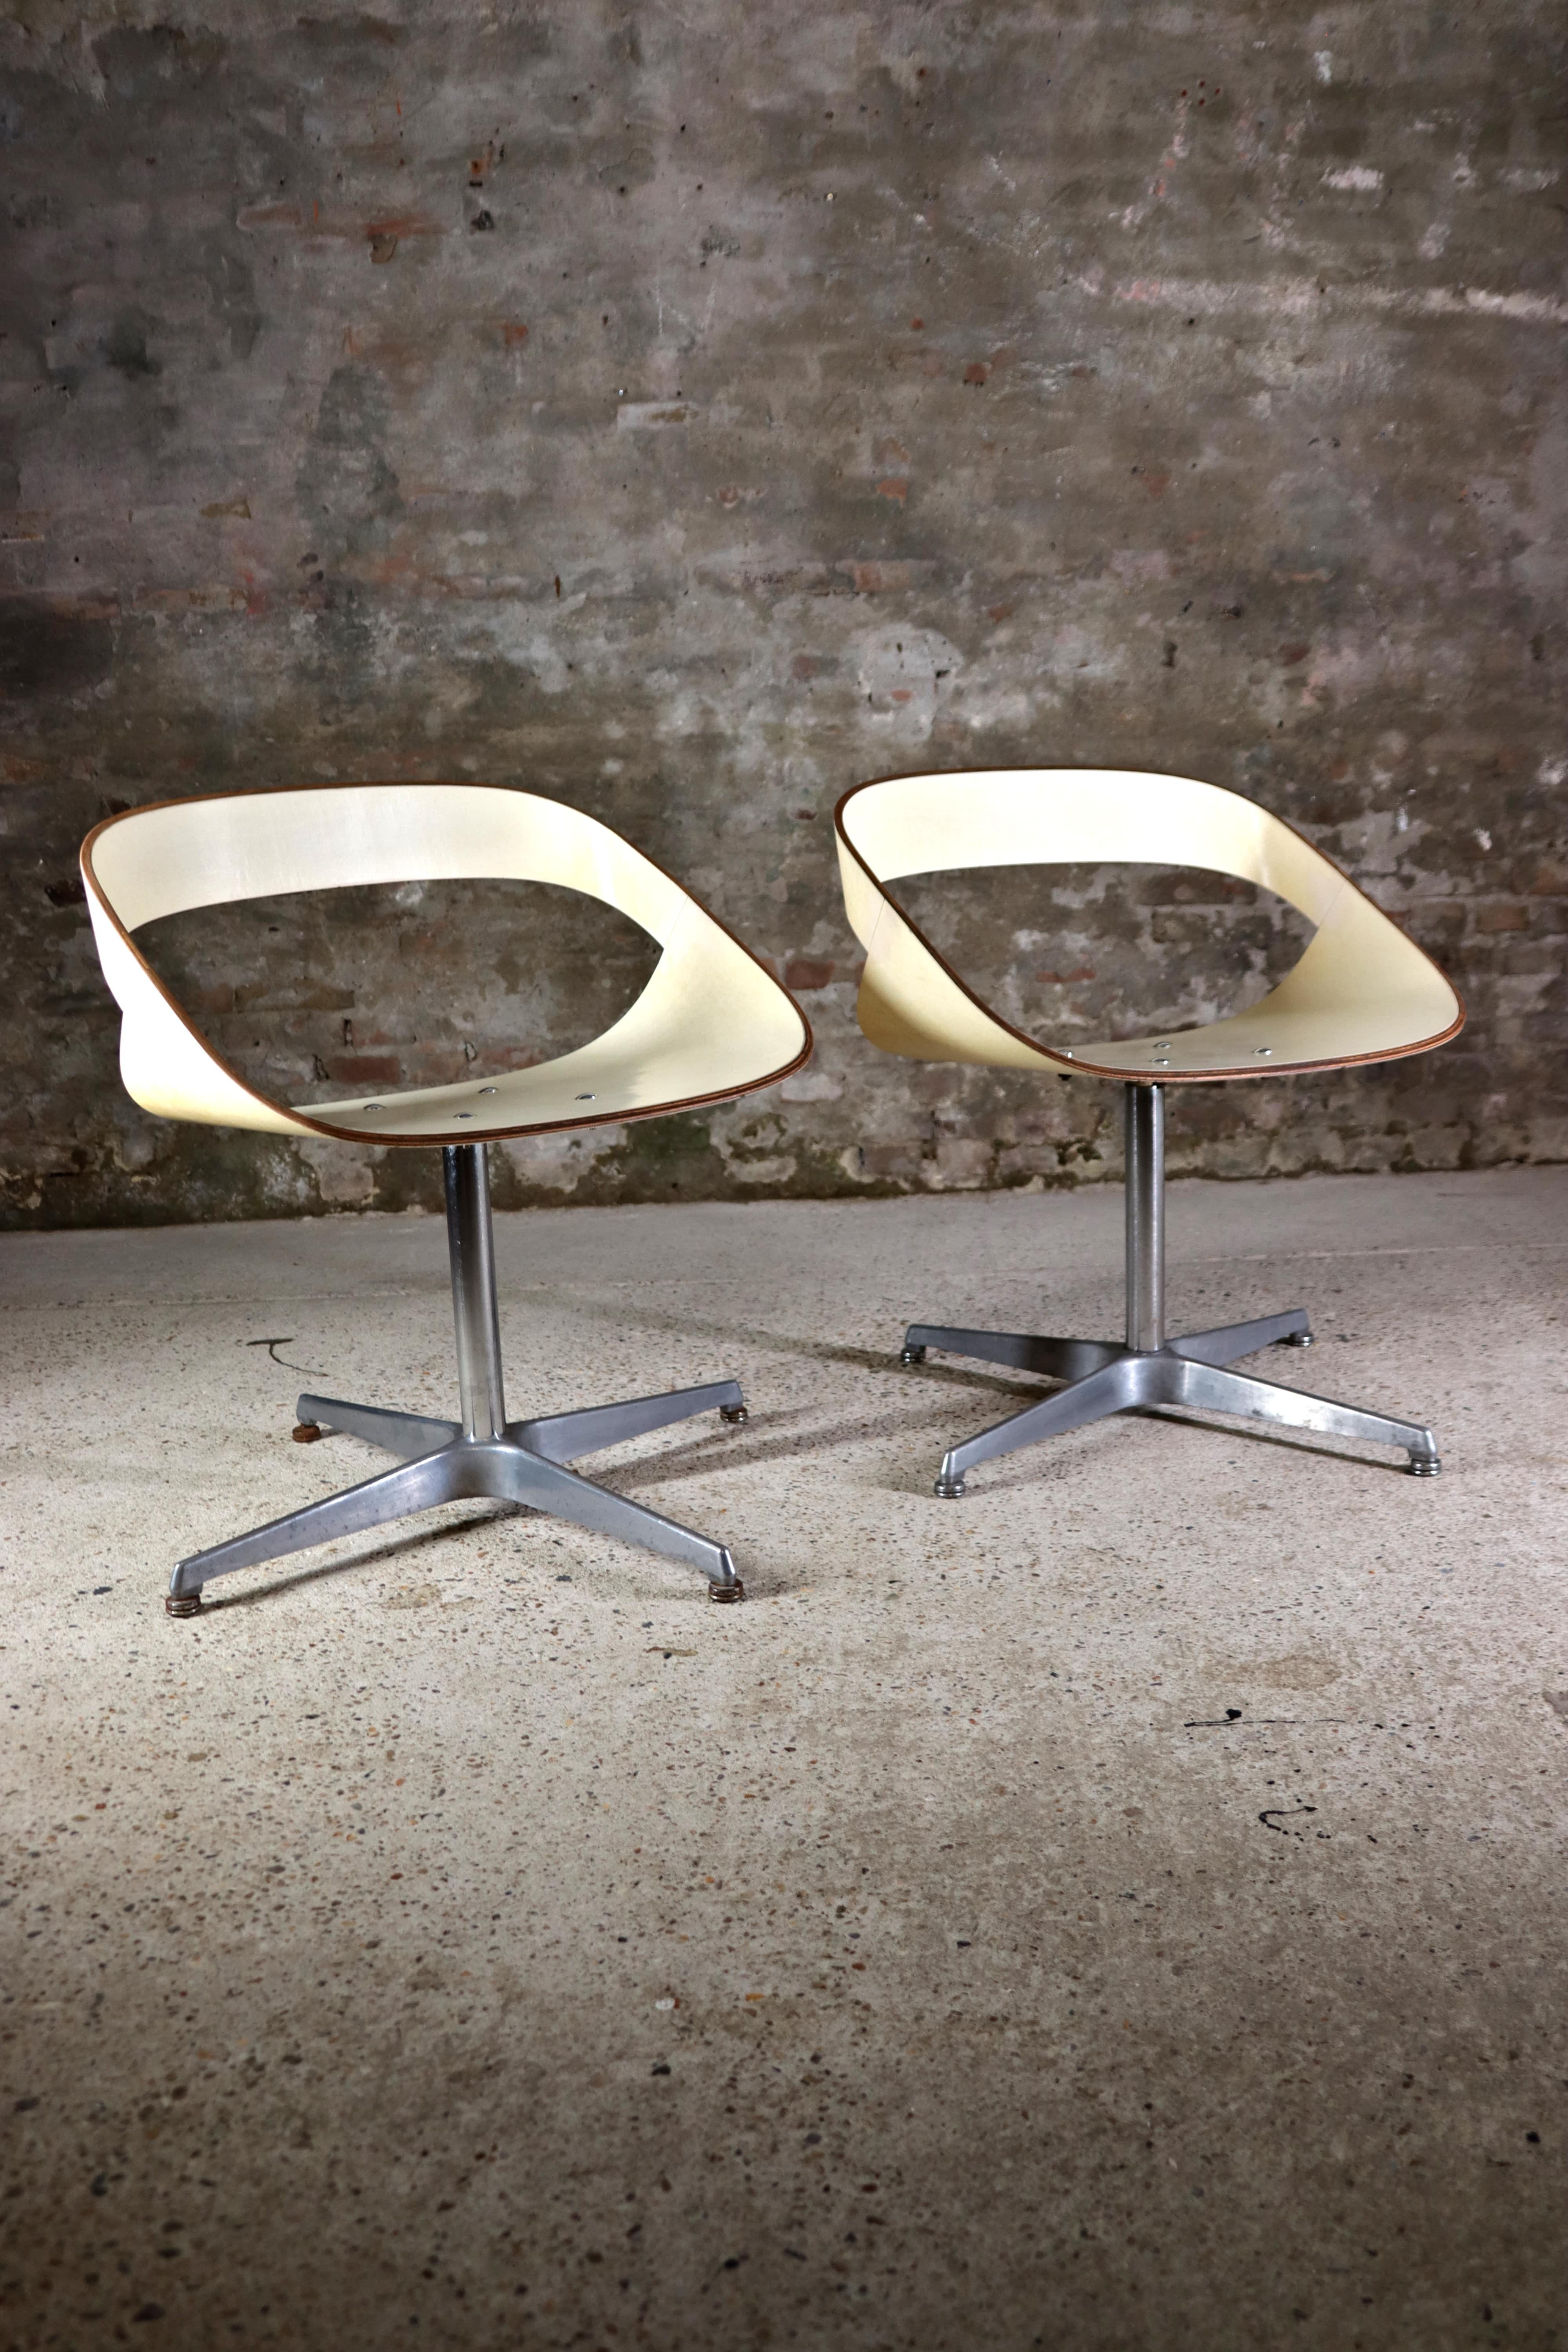 You won’t see this type of chairs very often. These are extremely rare RCA swivel chairs from the 130 Series designed by Geoffrey Harcourt in 1961 and manufactured by Artifort. It was designed as a graduation work at the Royal College of Art in